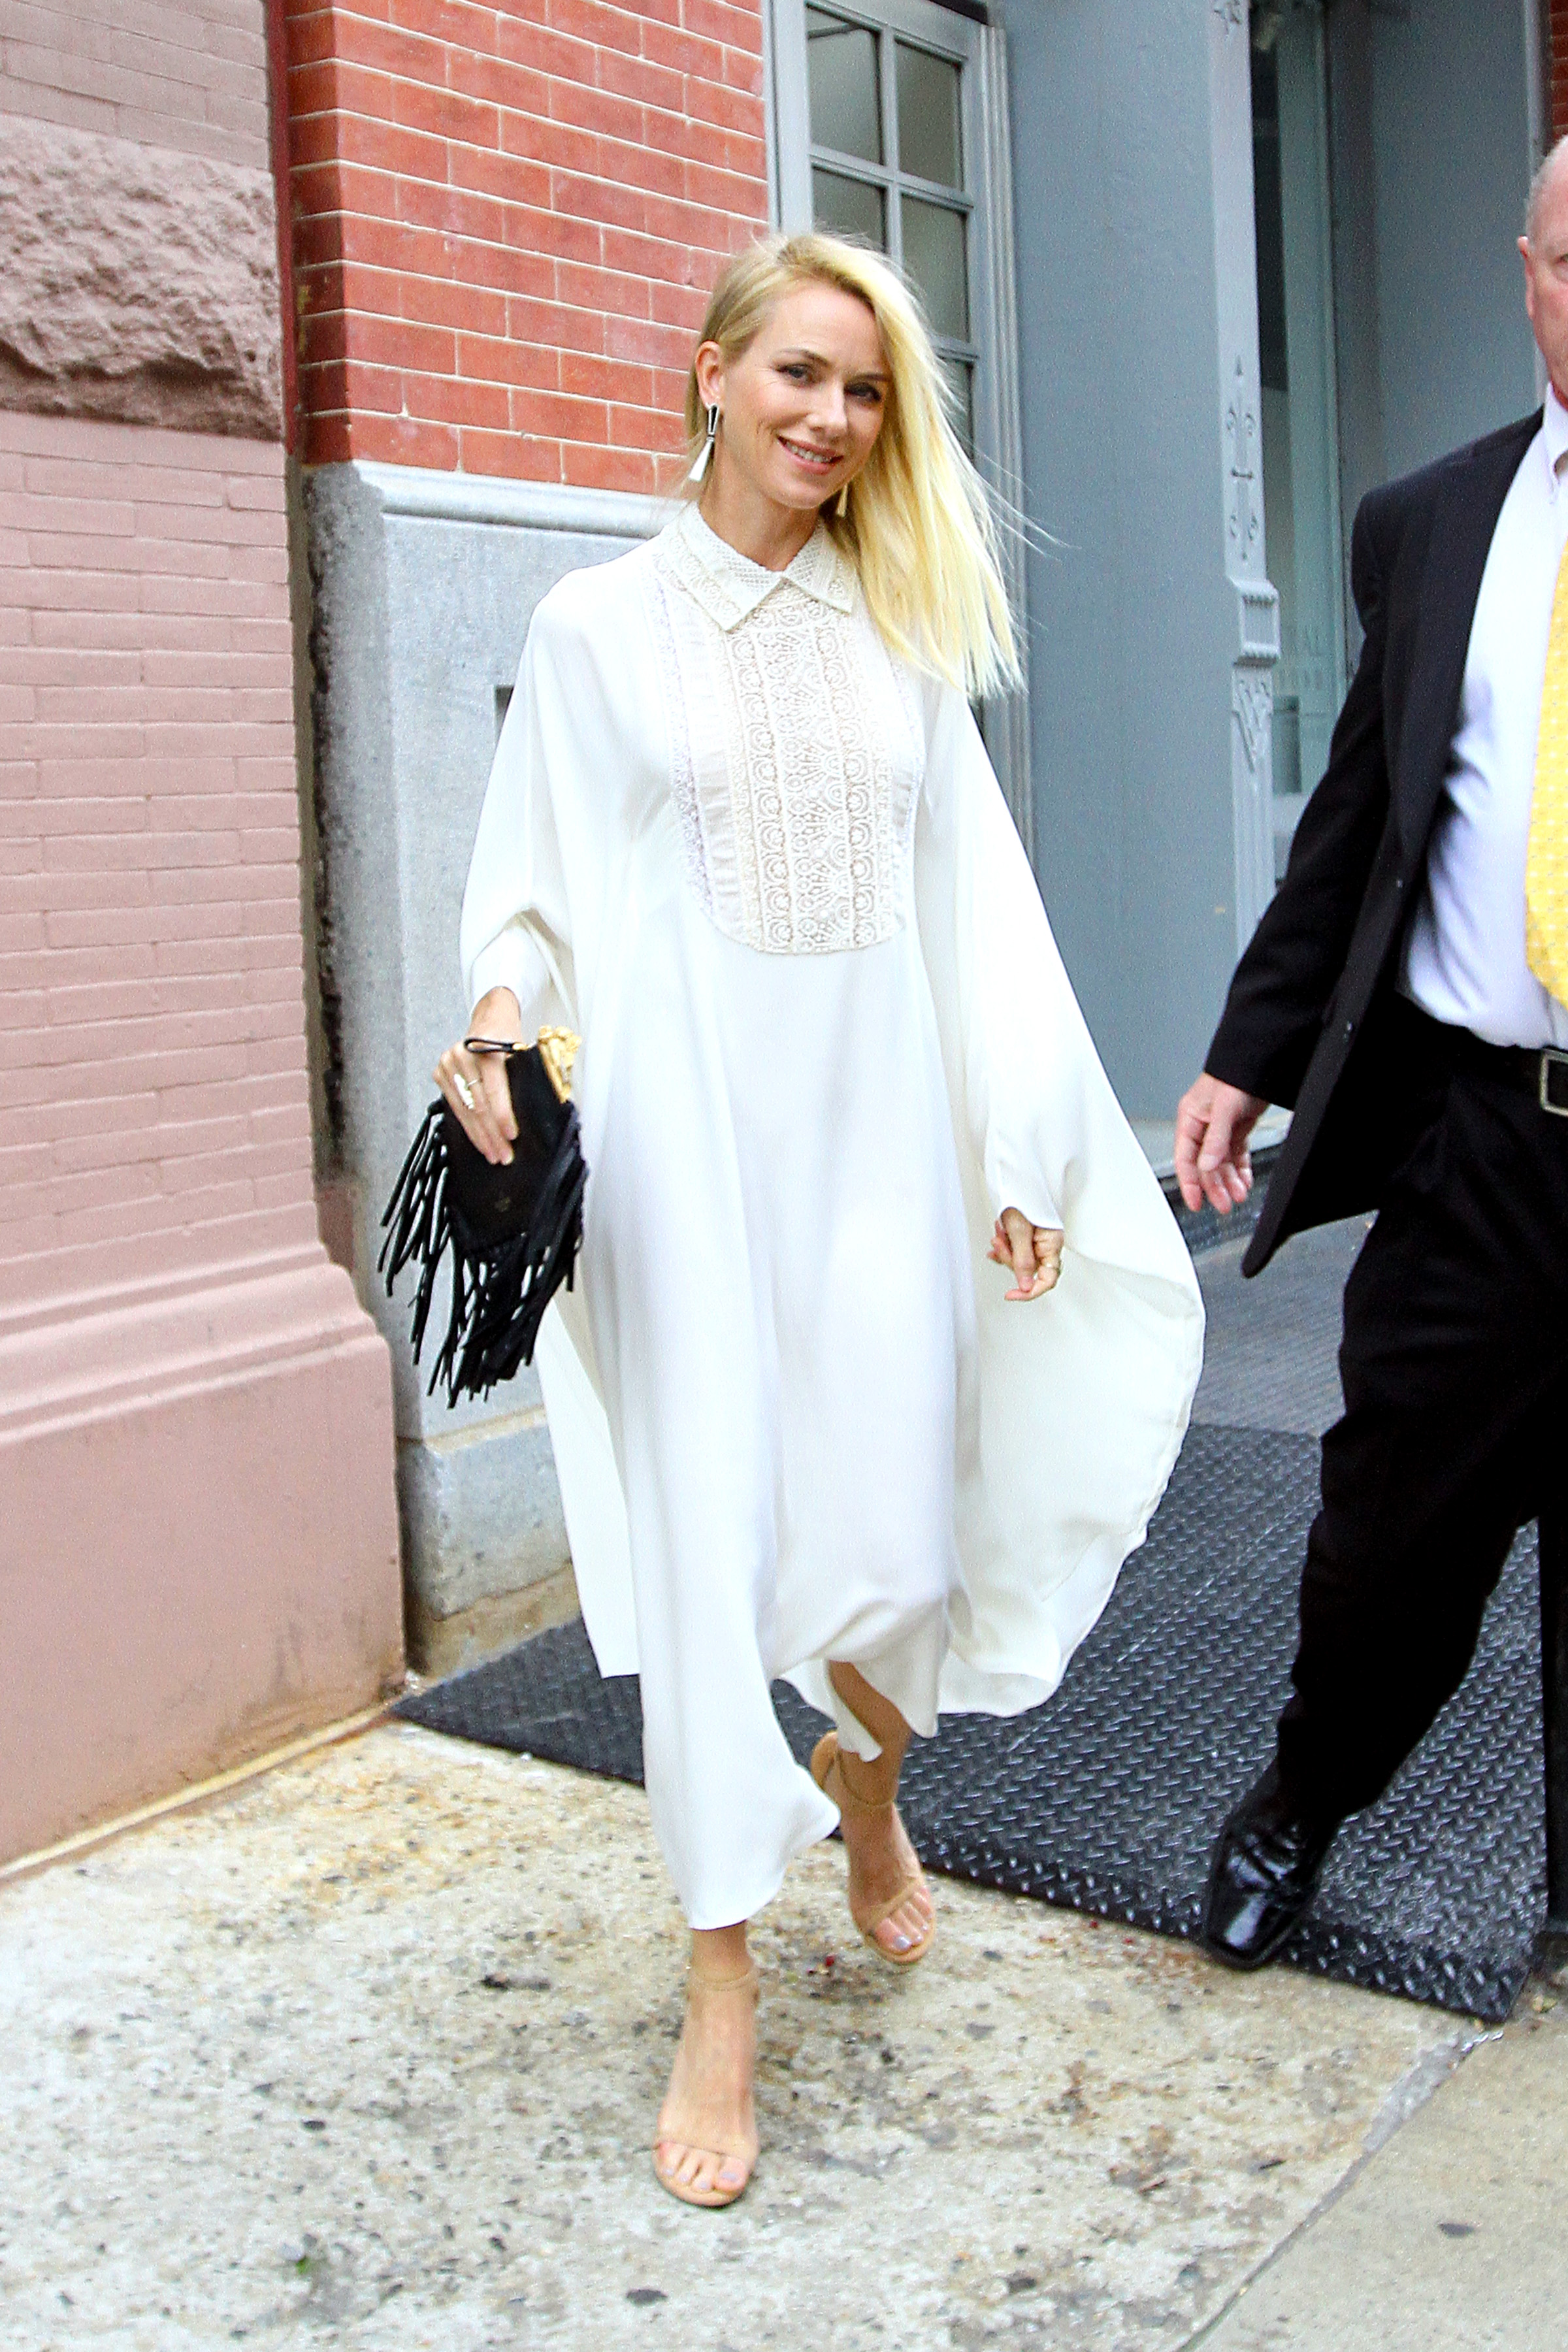 Naomi Watts looks glamorous in a white gown as she heads to celebrate her birthday in NYC